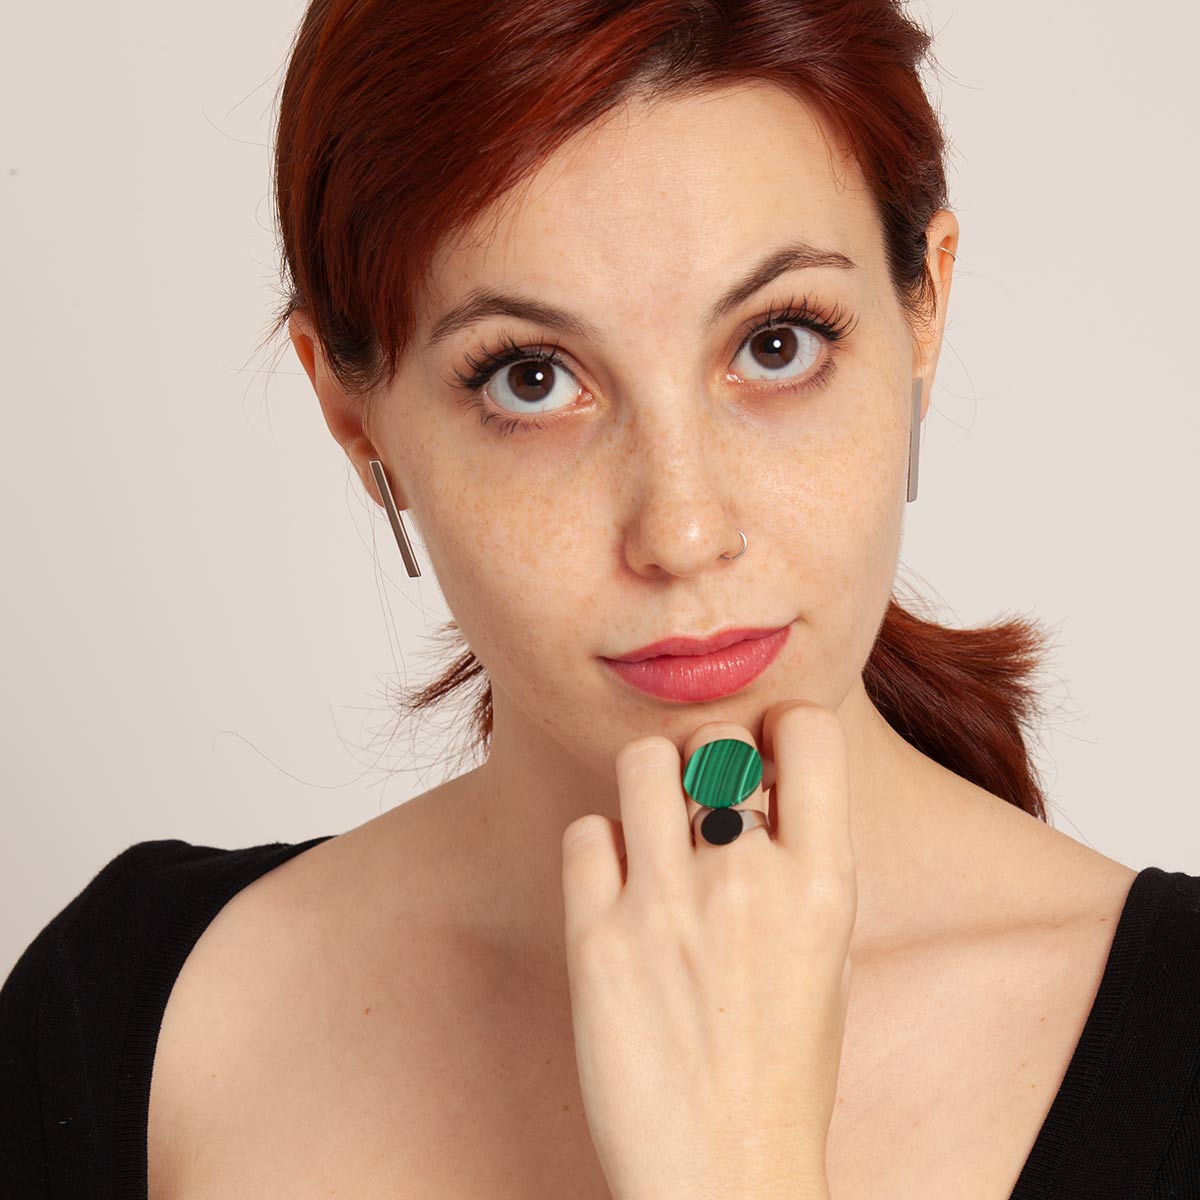 Ozu handmade sterling silver, onyx and malachite ring designed by Belen Bajo m2